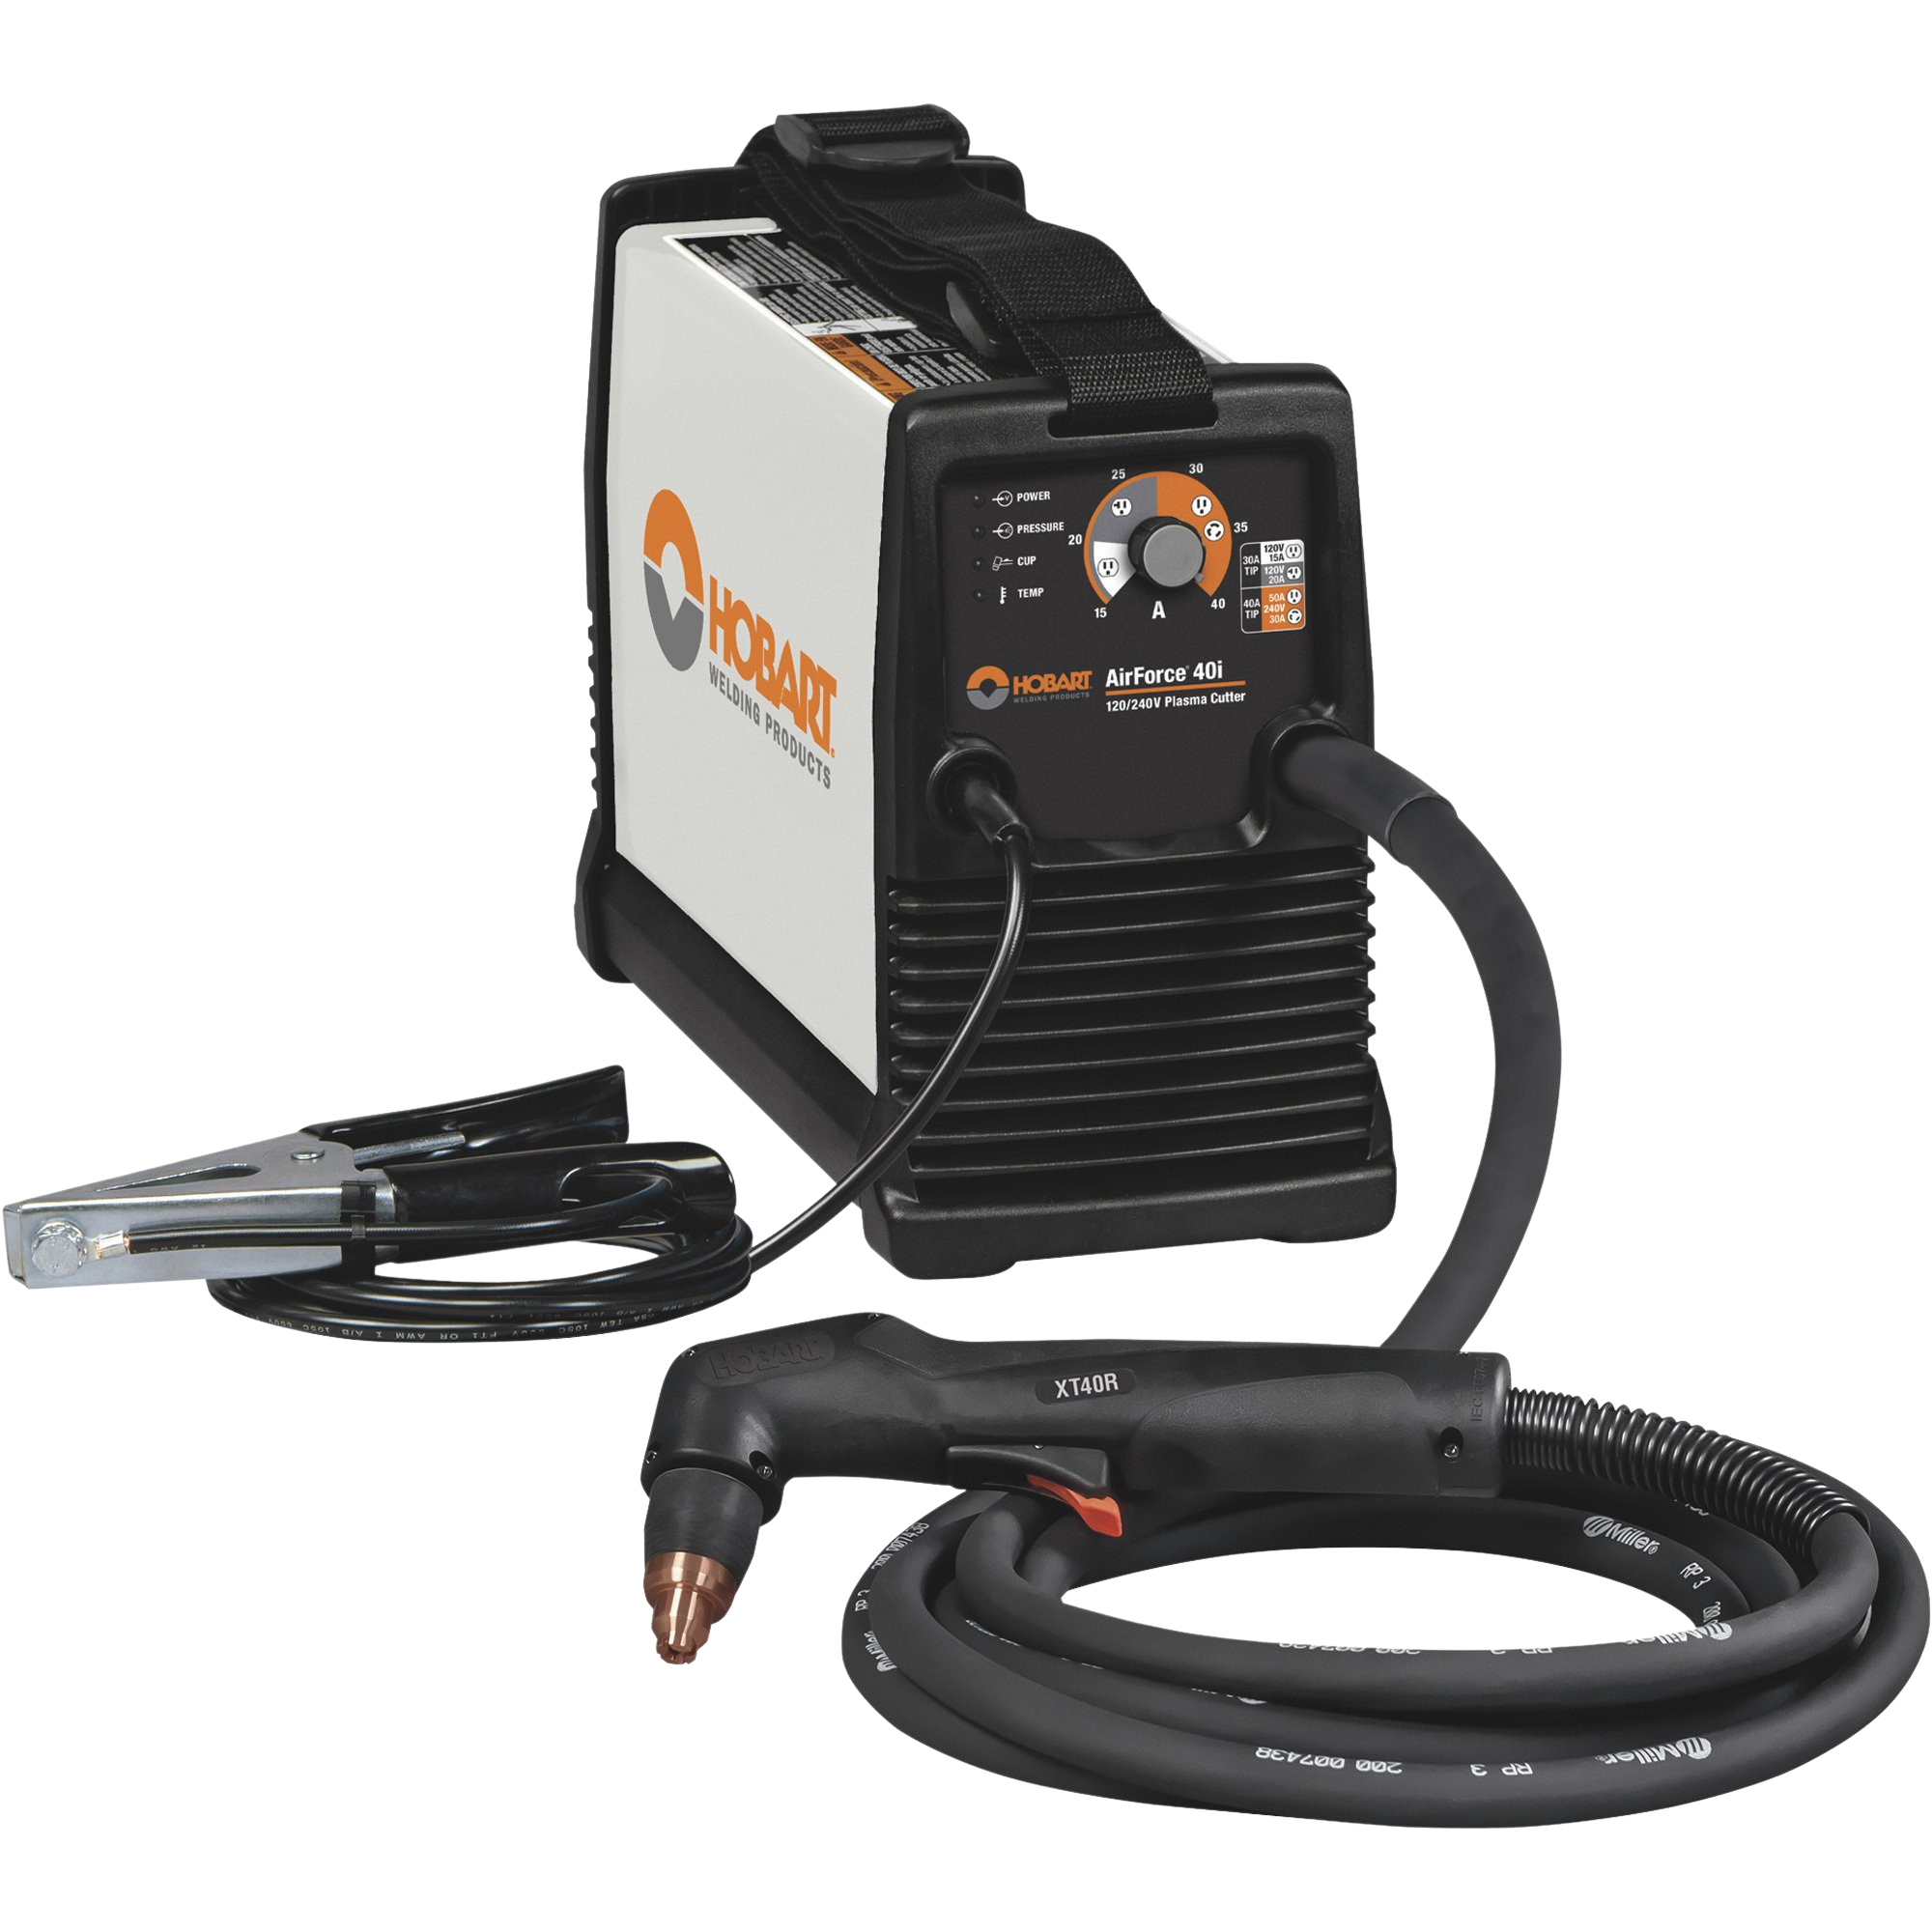 Hobart, Hobart 500575 Airforce 27i 120/240V Plasma Cutter with XT30R Torch and MVP Power Cord System Manufacturer RFB